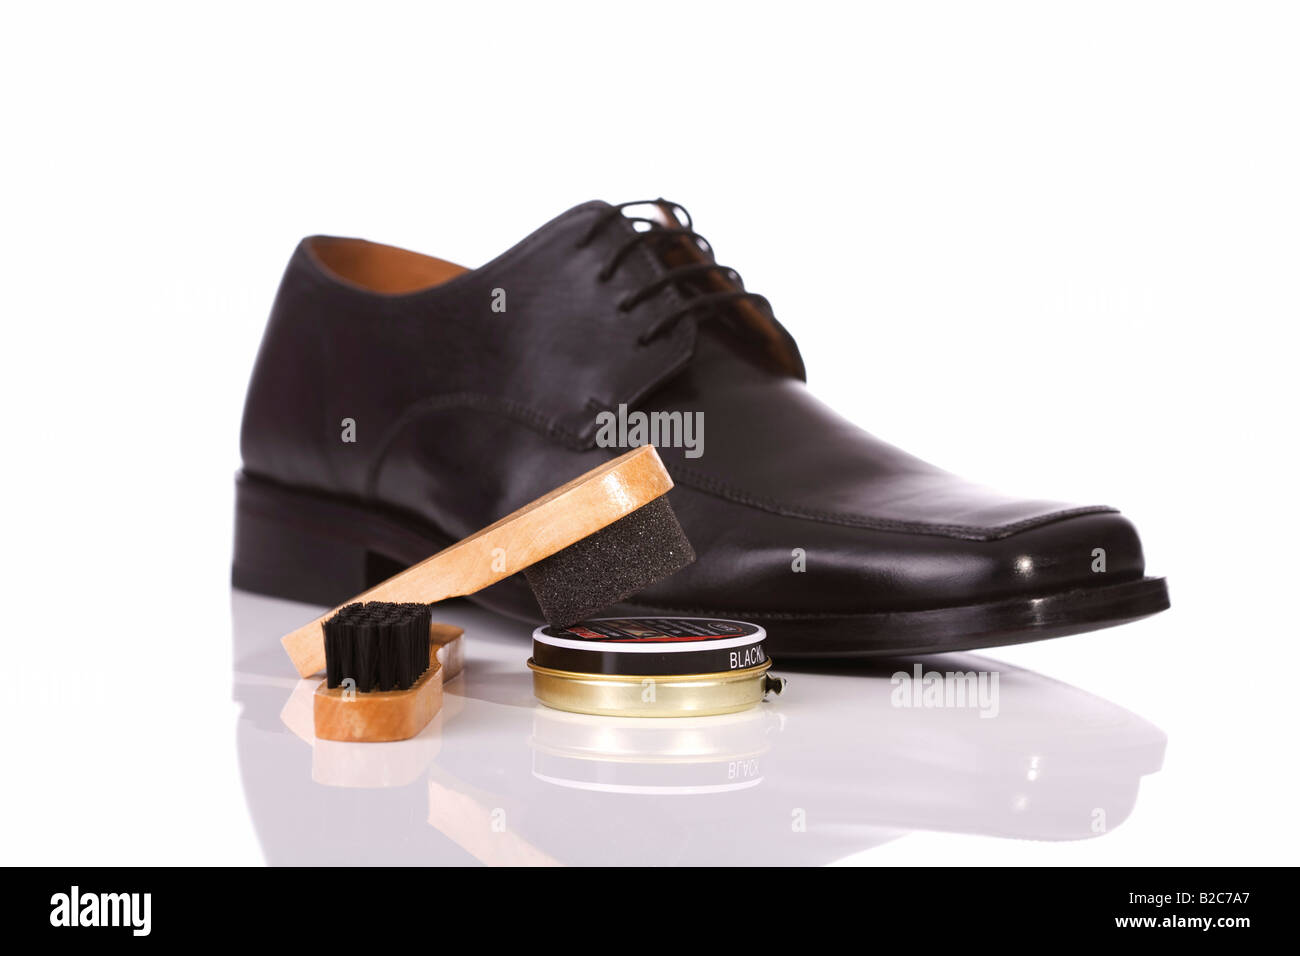 Black leather shoes for men, set of shoe care products, brushes and shoe polish Stock Photo